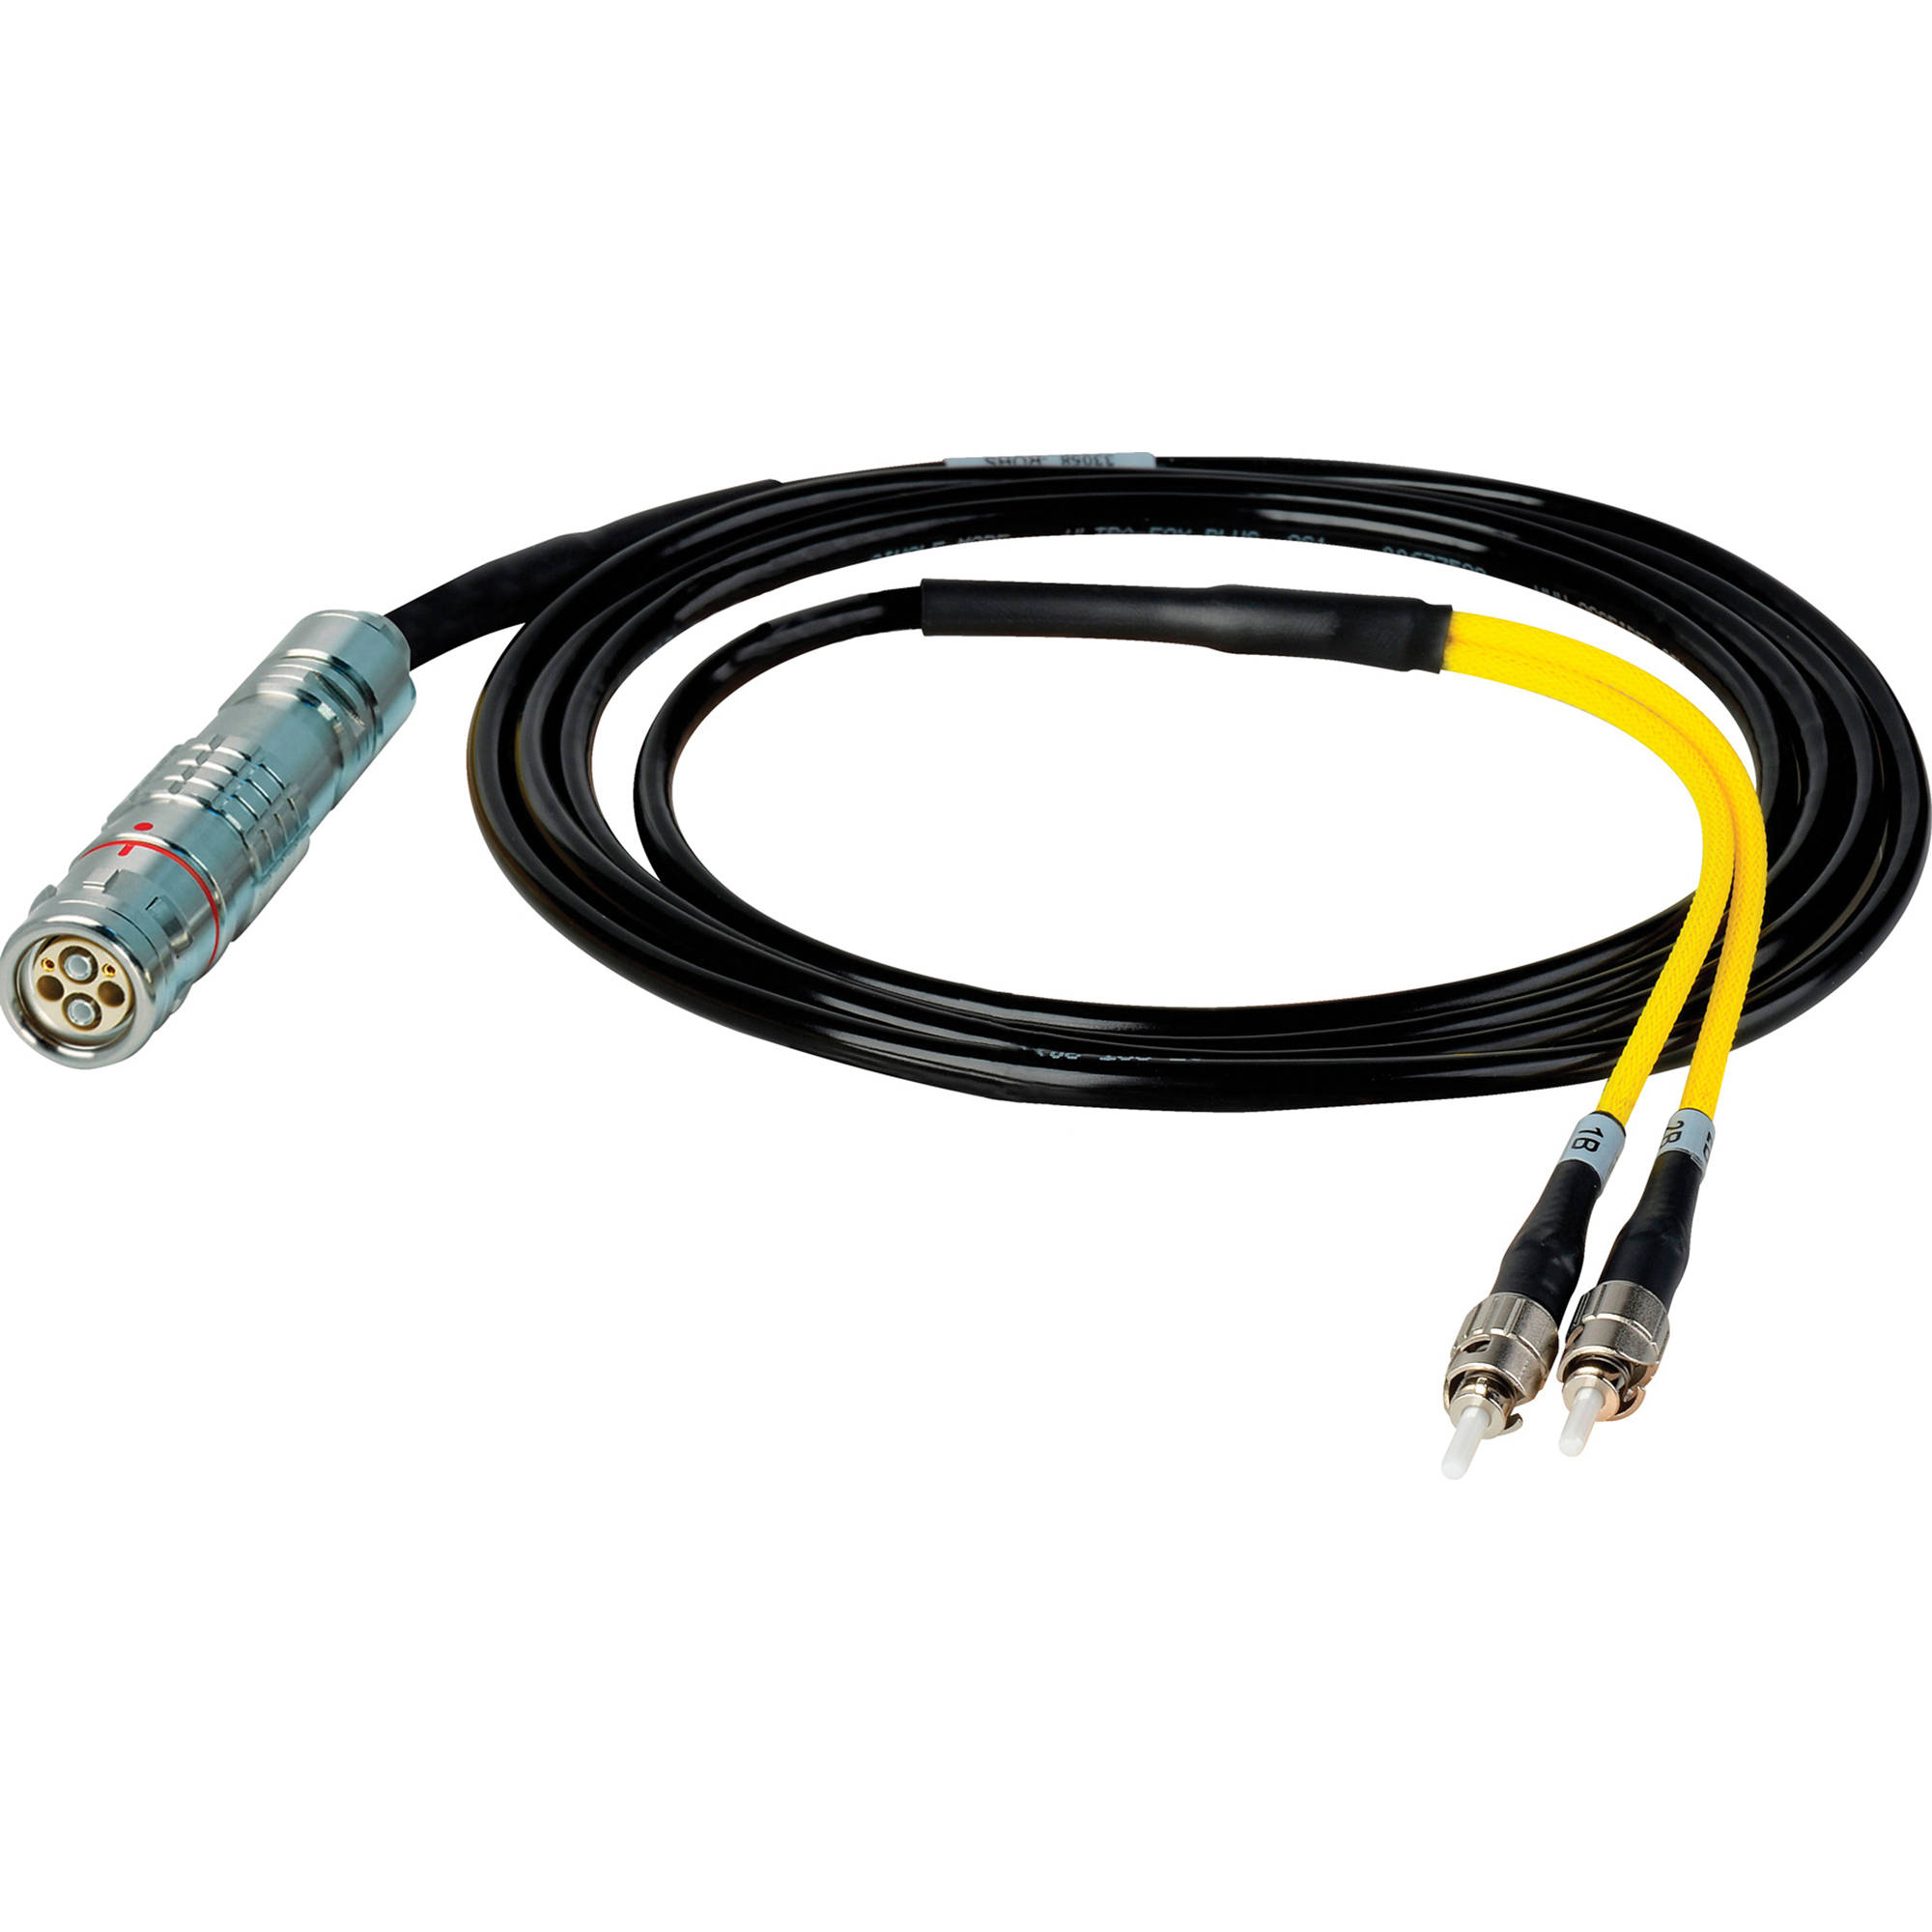 Camplex LEMO FUW to Dual ST In-Line Fiber Optic Breakout Cable - 10 Foot